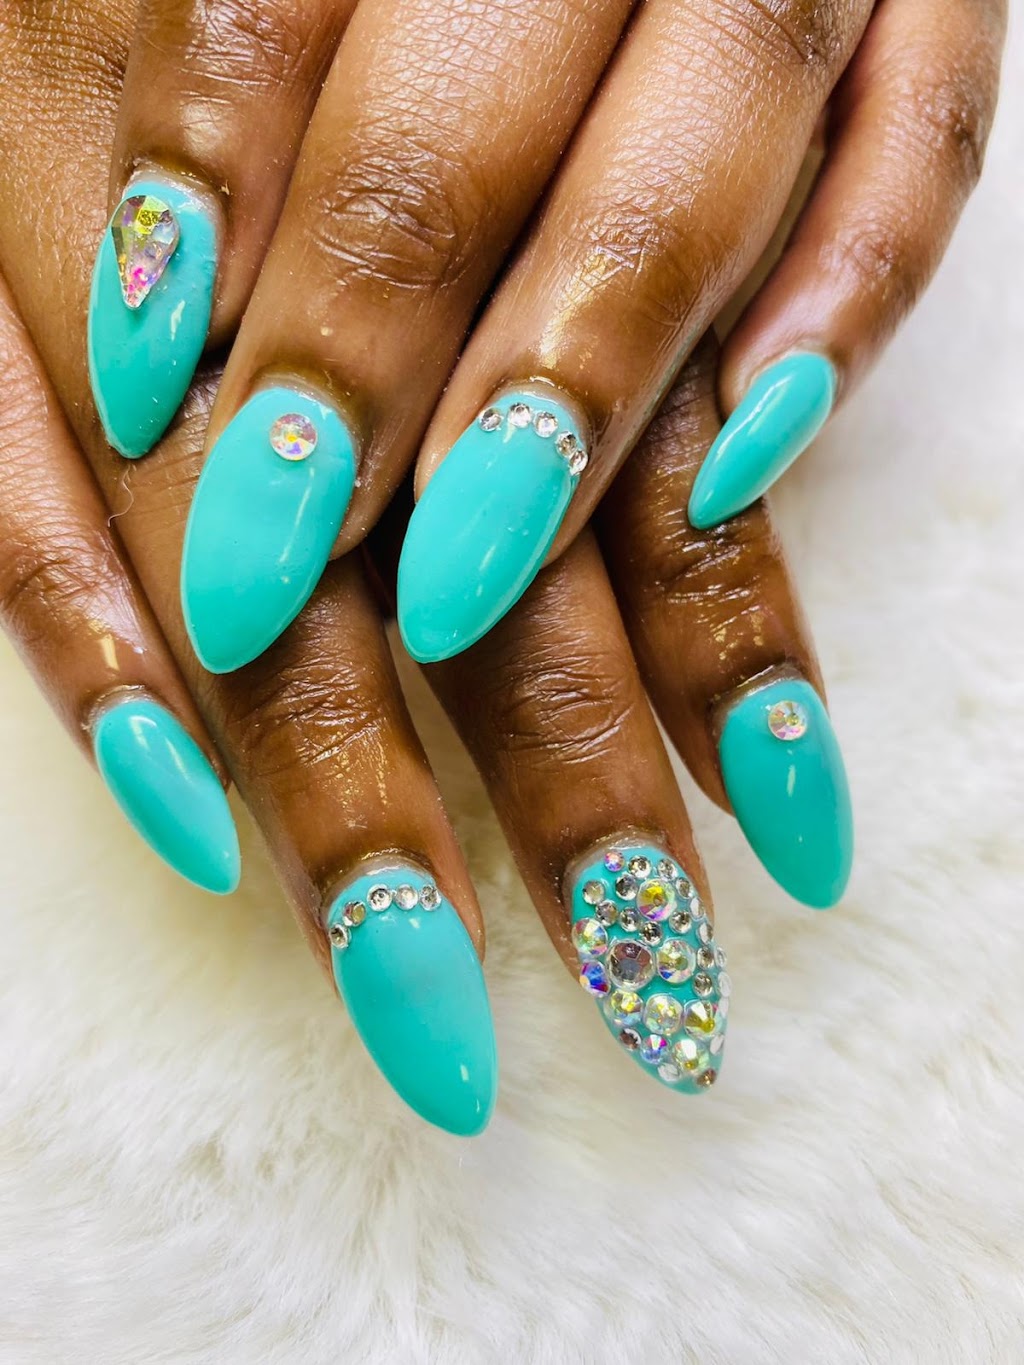 EVAS NAILS AND SPA | 233 S Broadway b2, Pennsville Township, NJ 08070 | Phone: (856) 851-2230